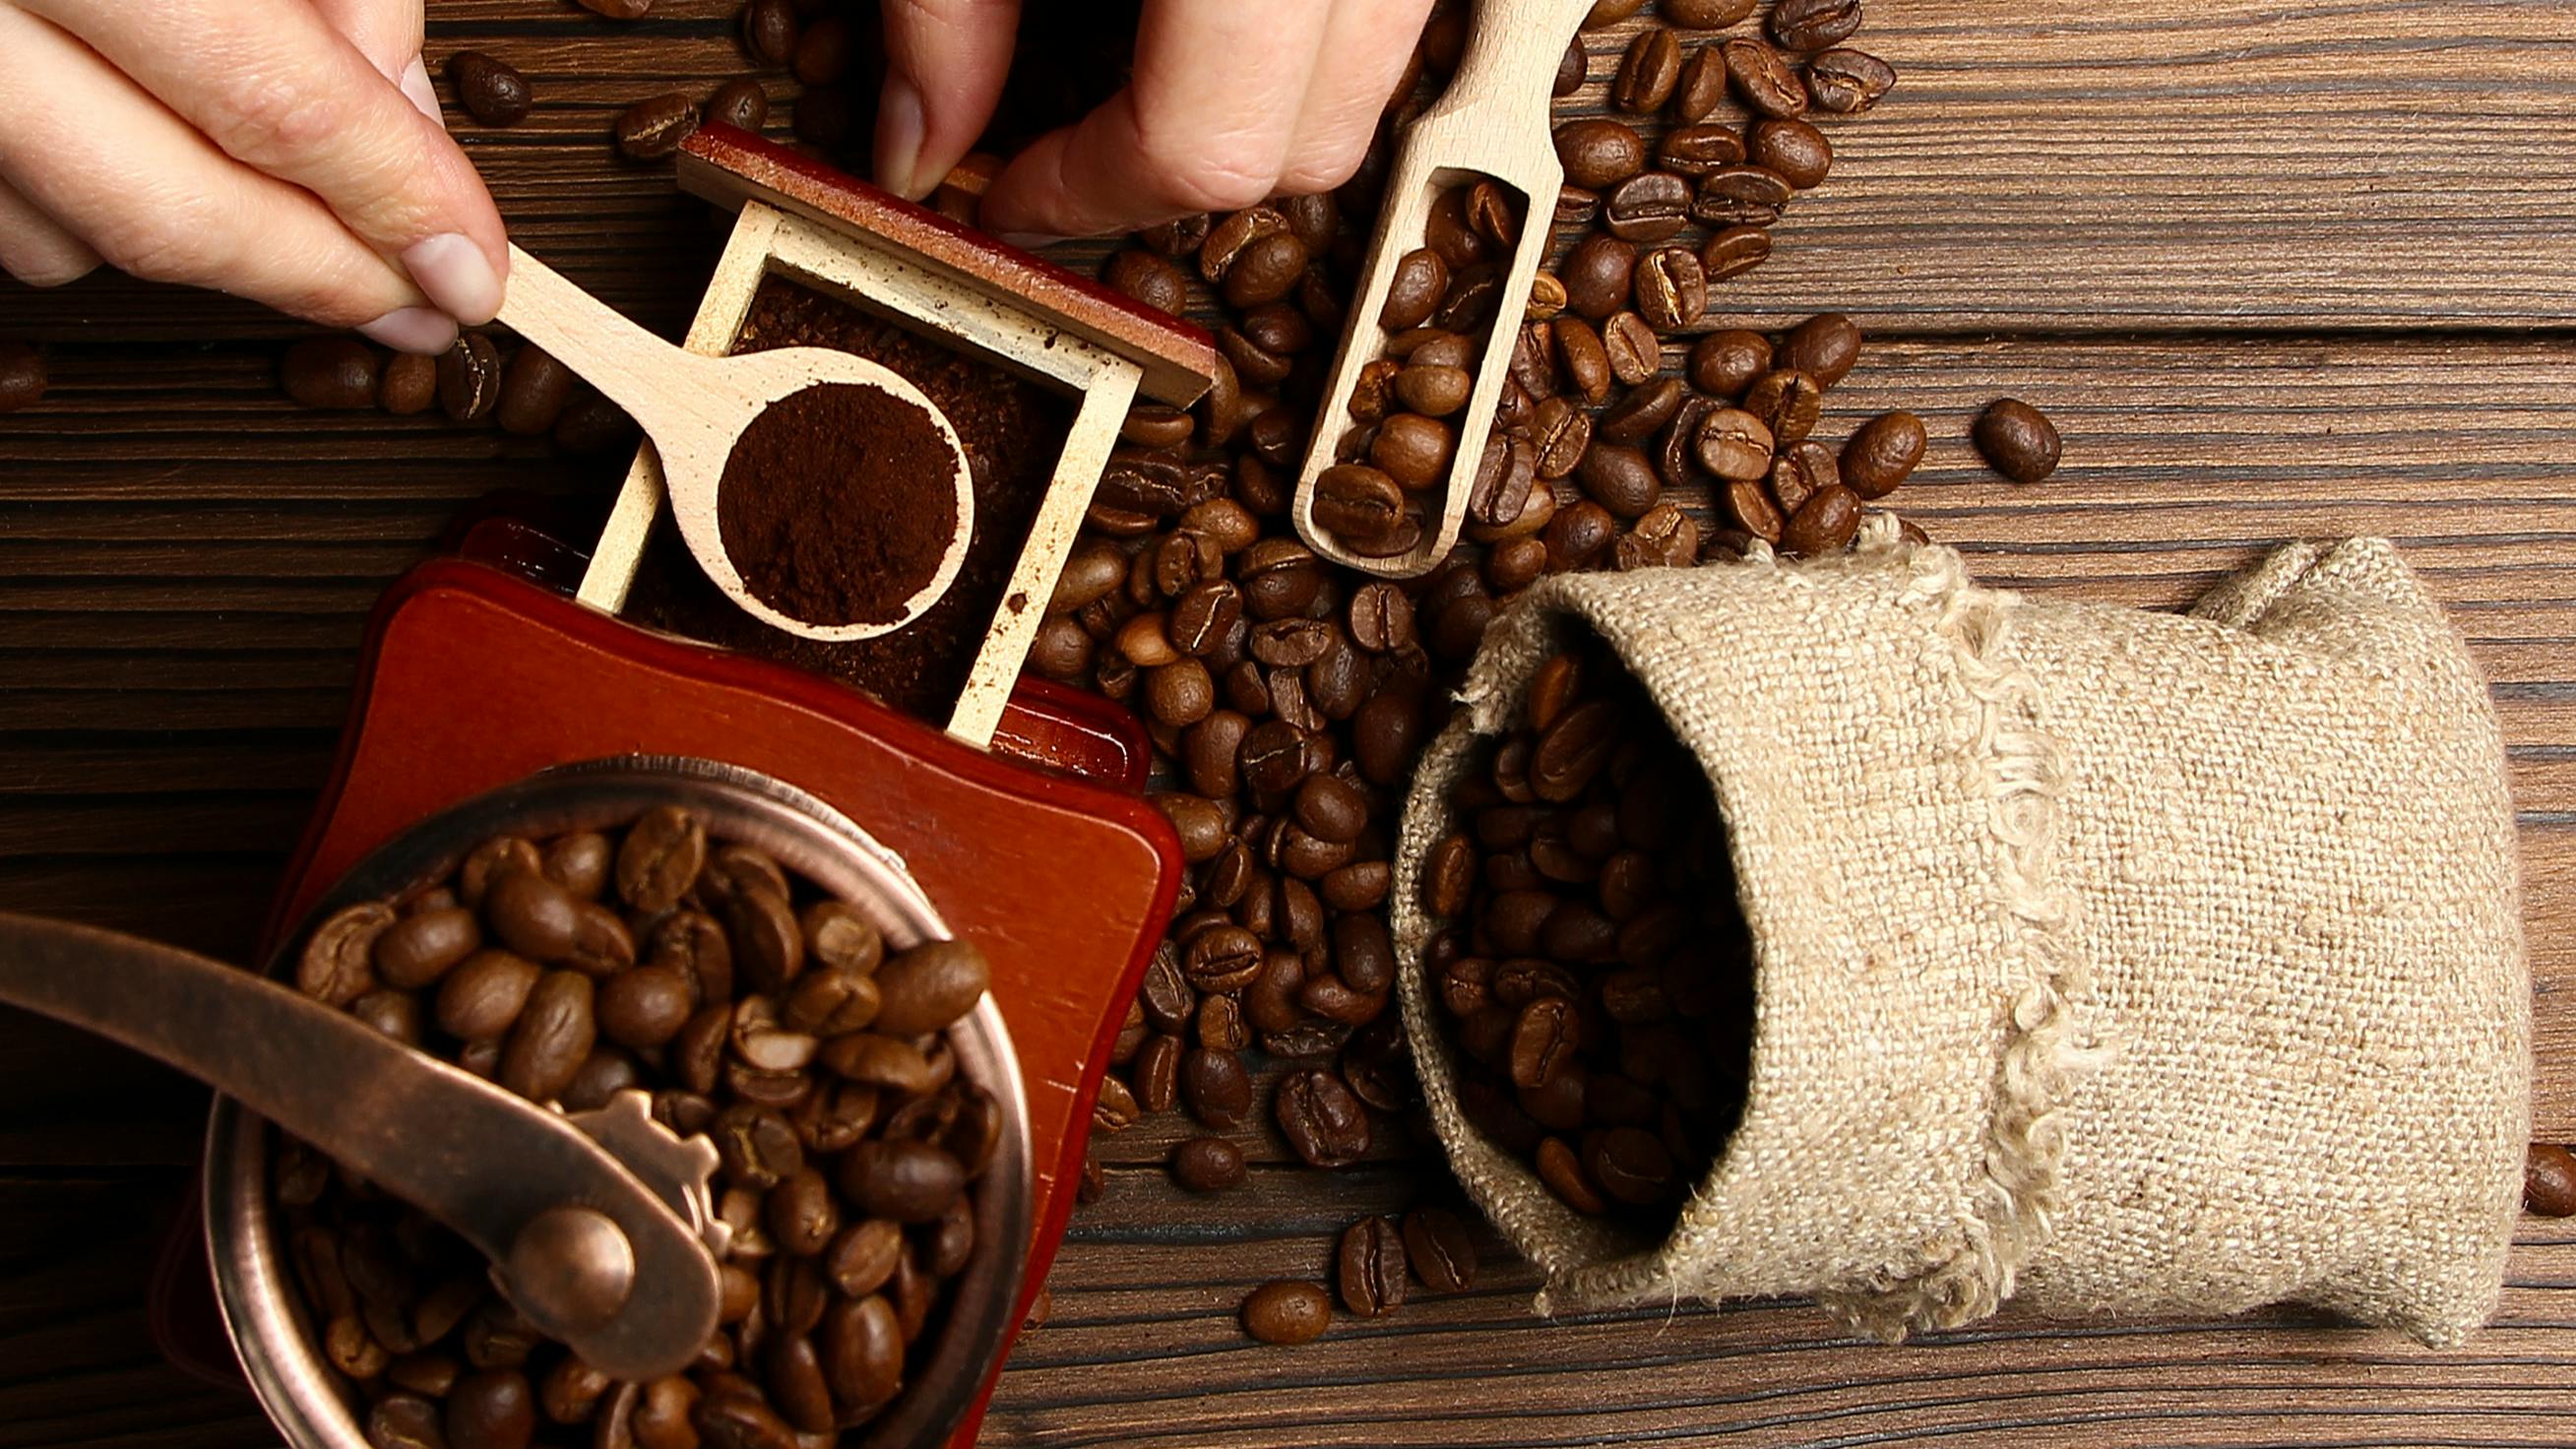 Top down view of someone removing ground coffee from a cofee grinder. 